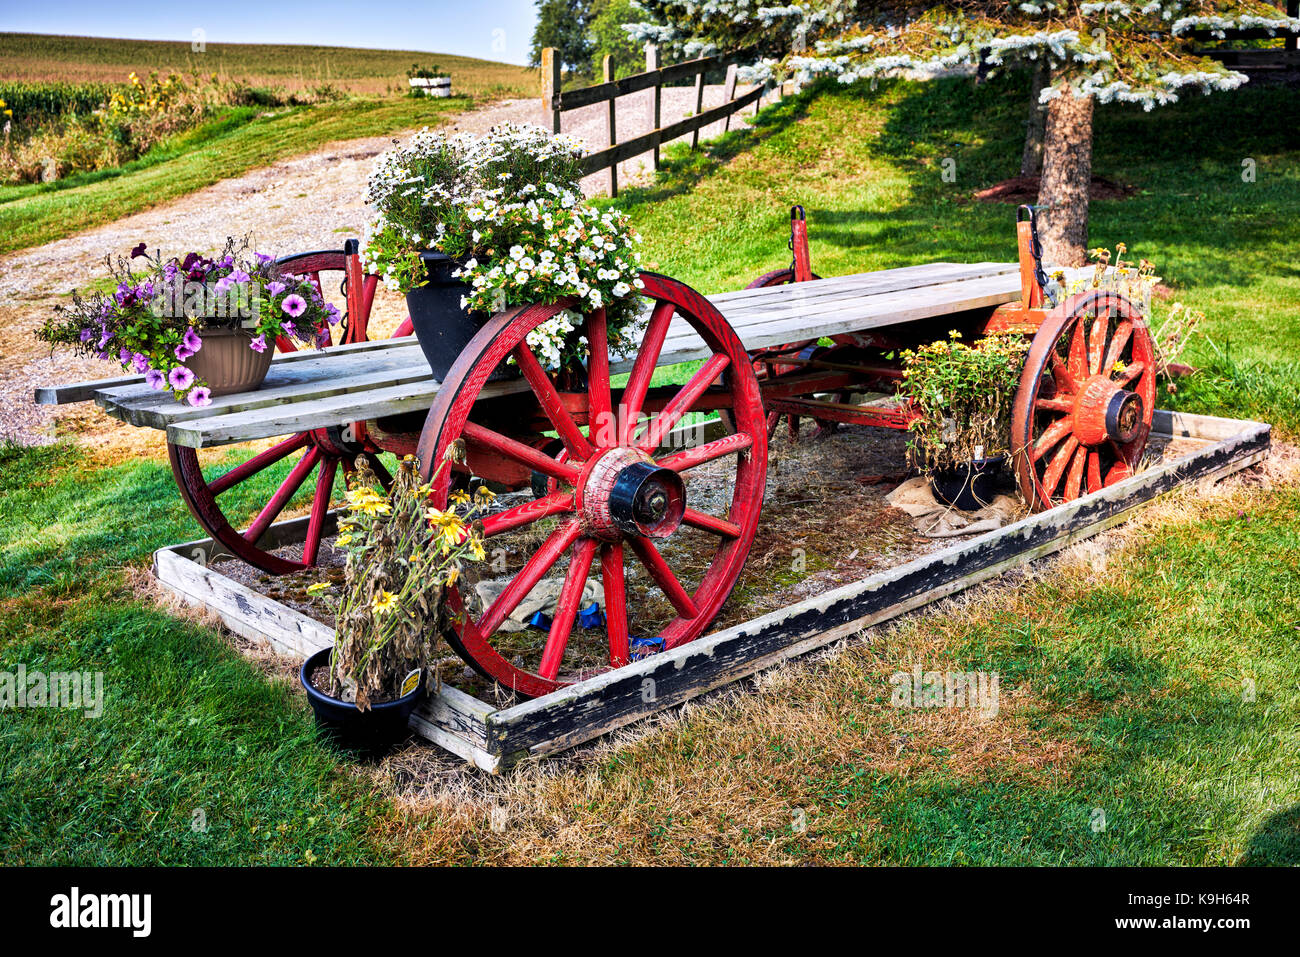 Painted farm wagon with floral displays Stock Photo